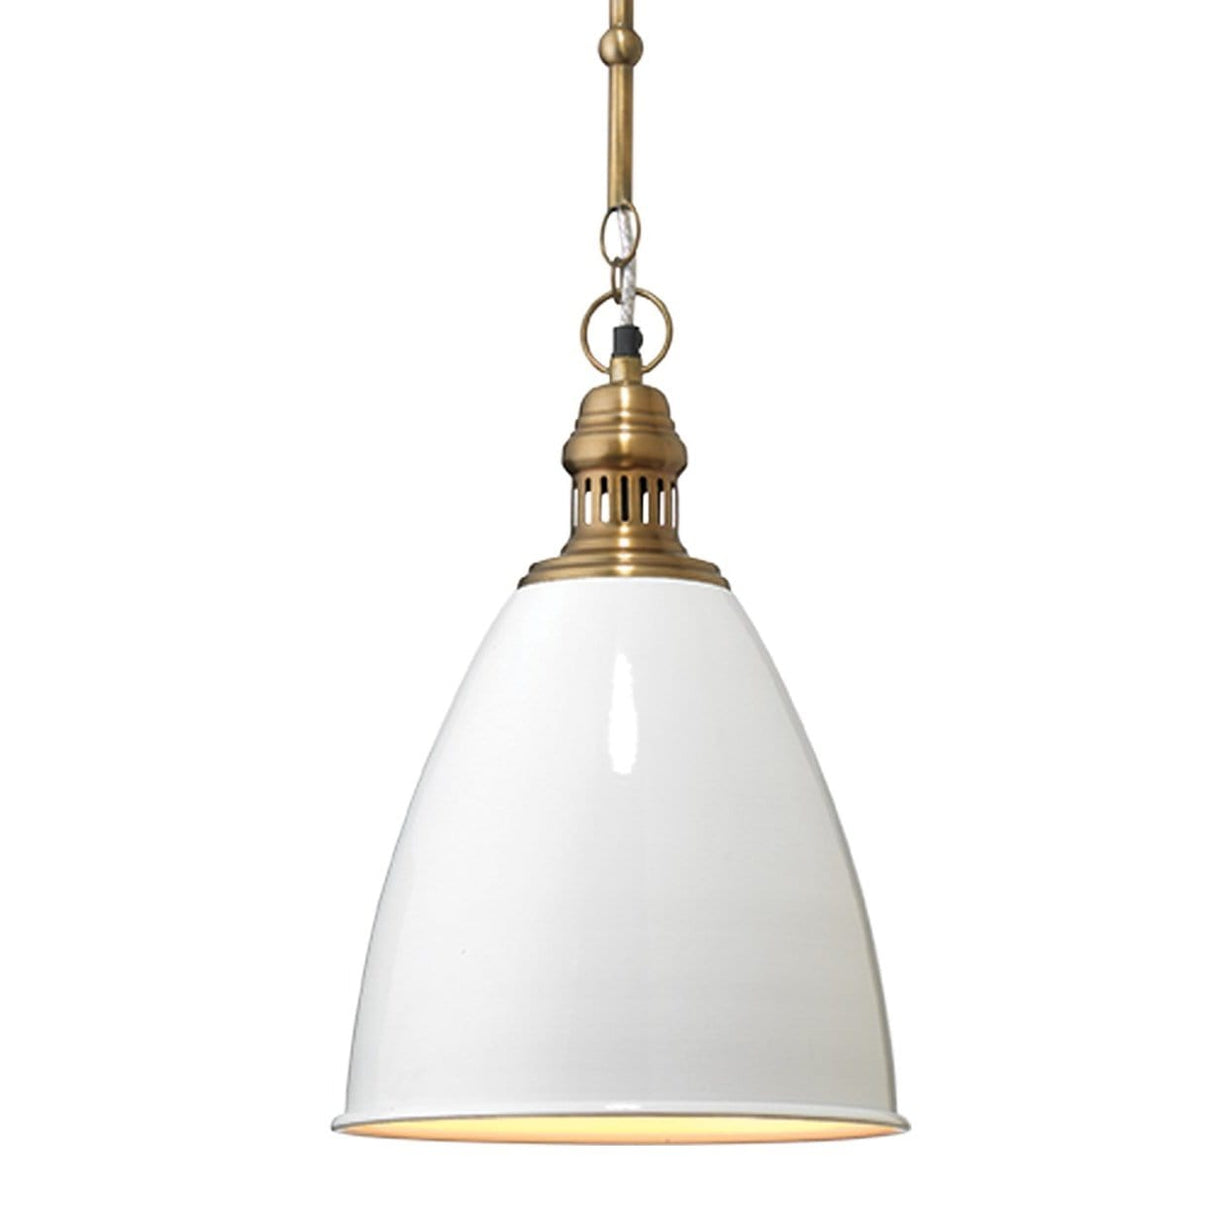 Jamie Young Co. Tavern Pendant - White Lighting jamie-young-5TAVE-PDWH 00688933020106